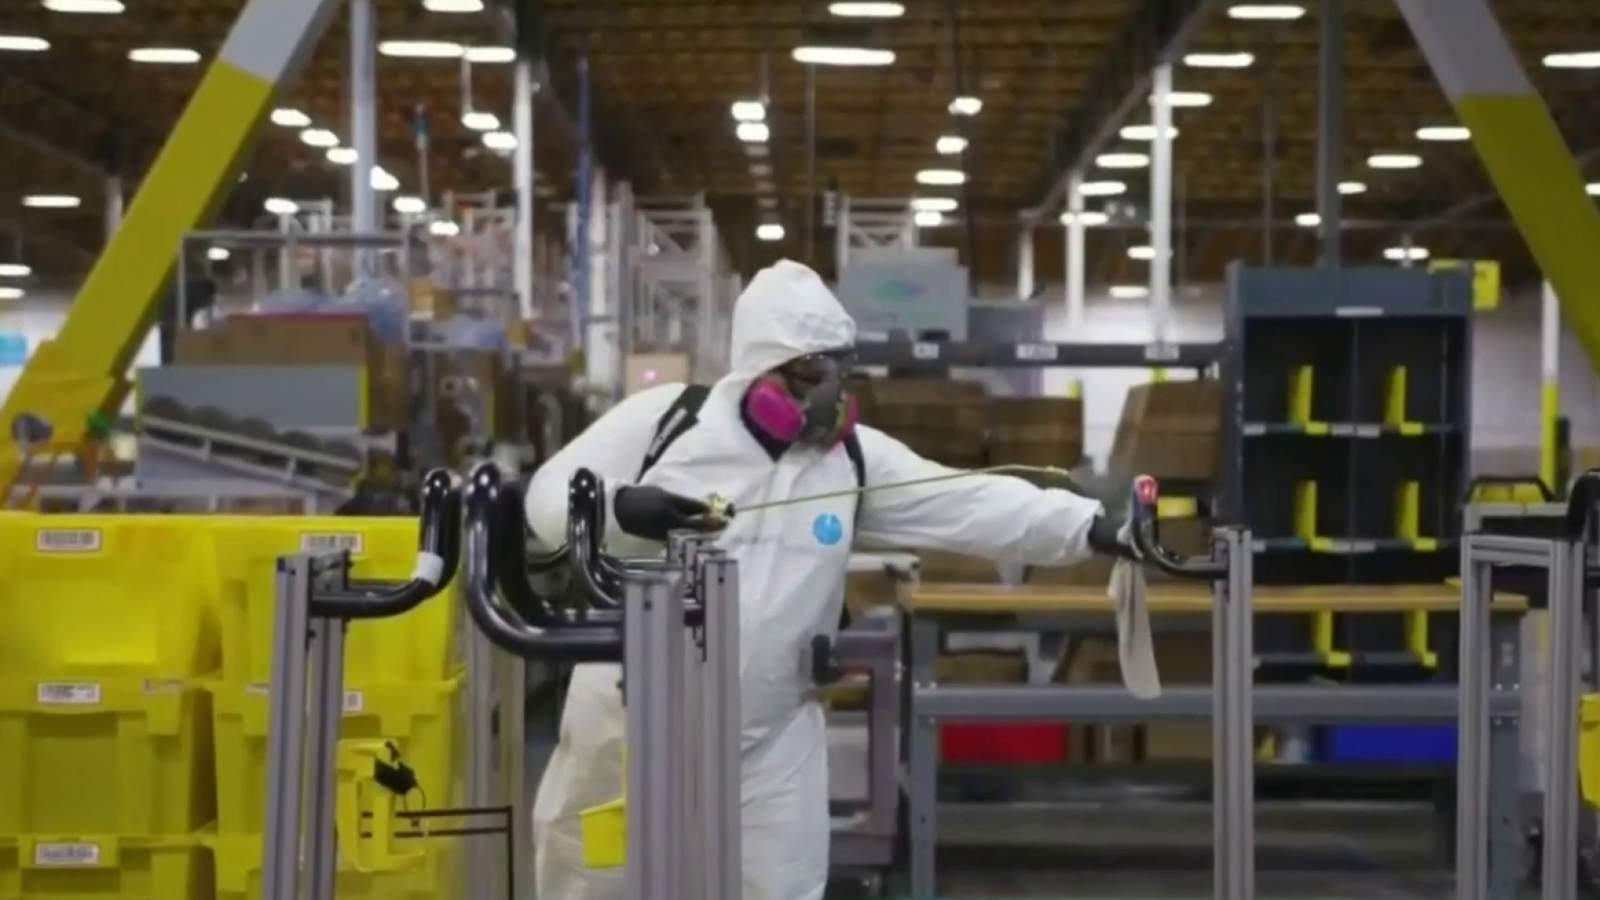 An inside look at how Amazon in Romulus has changed to keep up with COVID-19 pandemic demands